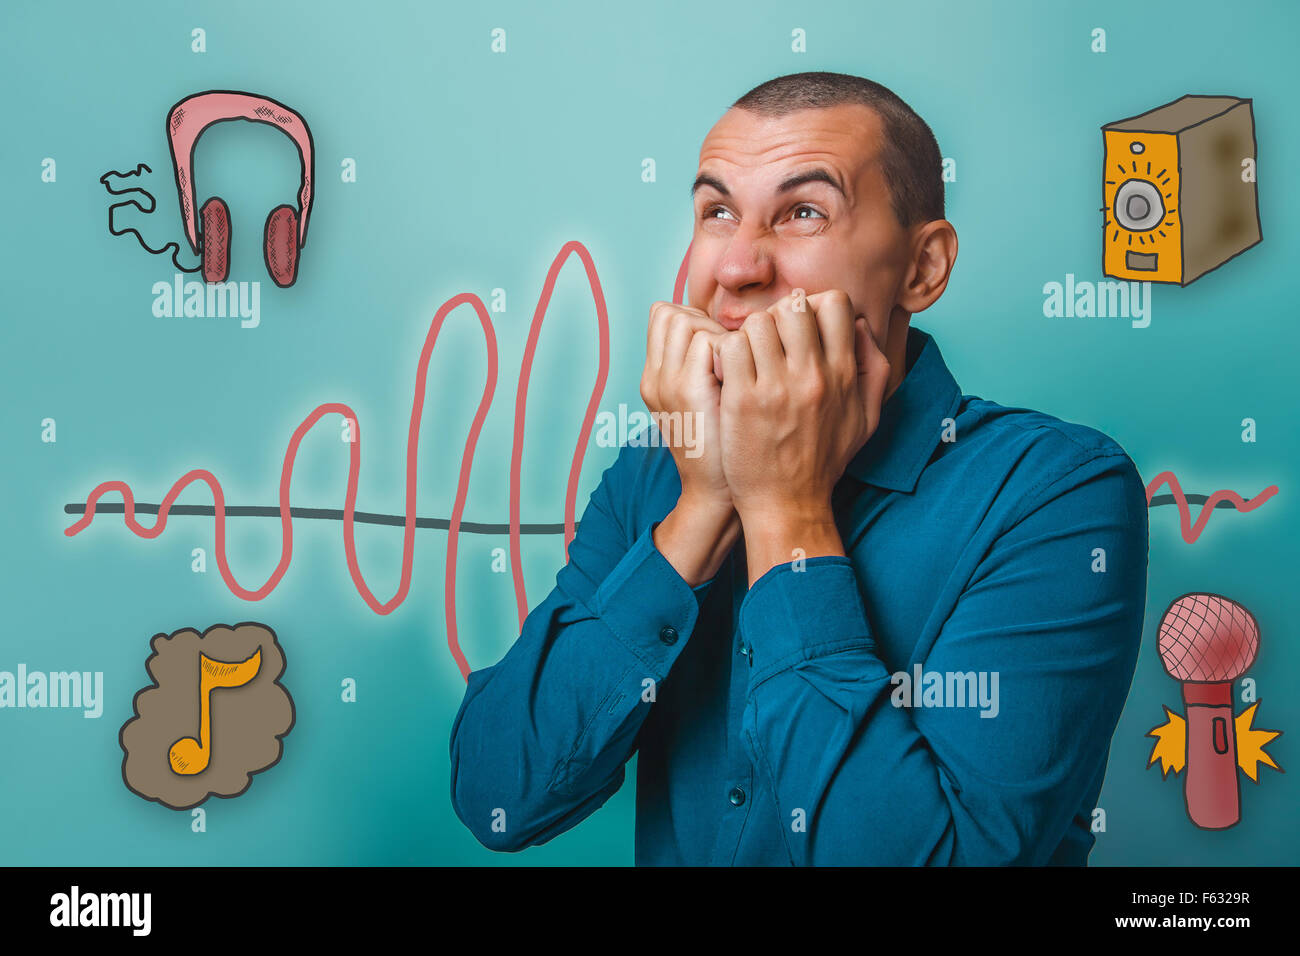 businessman man wrinkled his face and closed his hands over her mouth emotion sound wave music radio sketch symbol Stock Photo